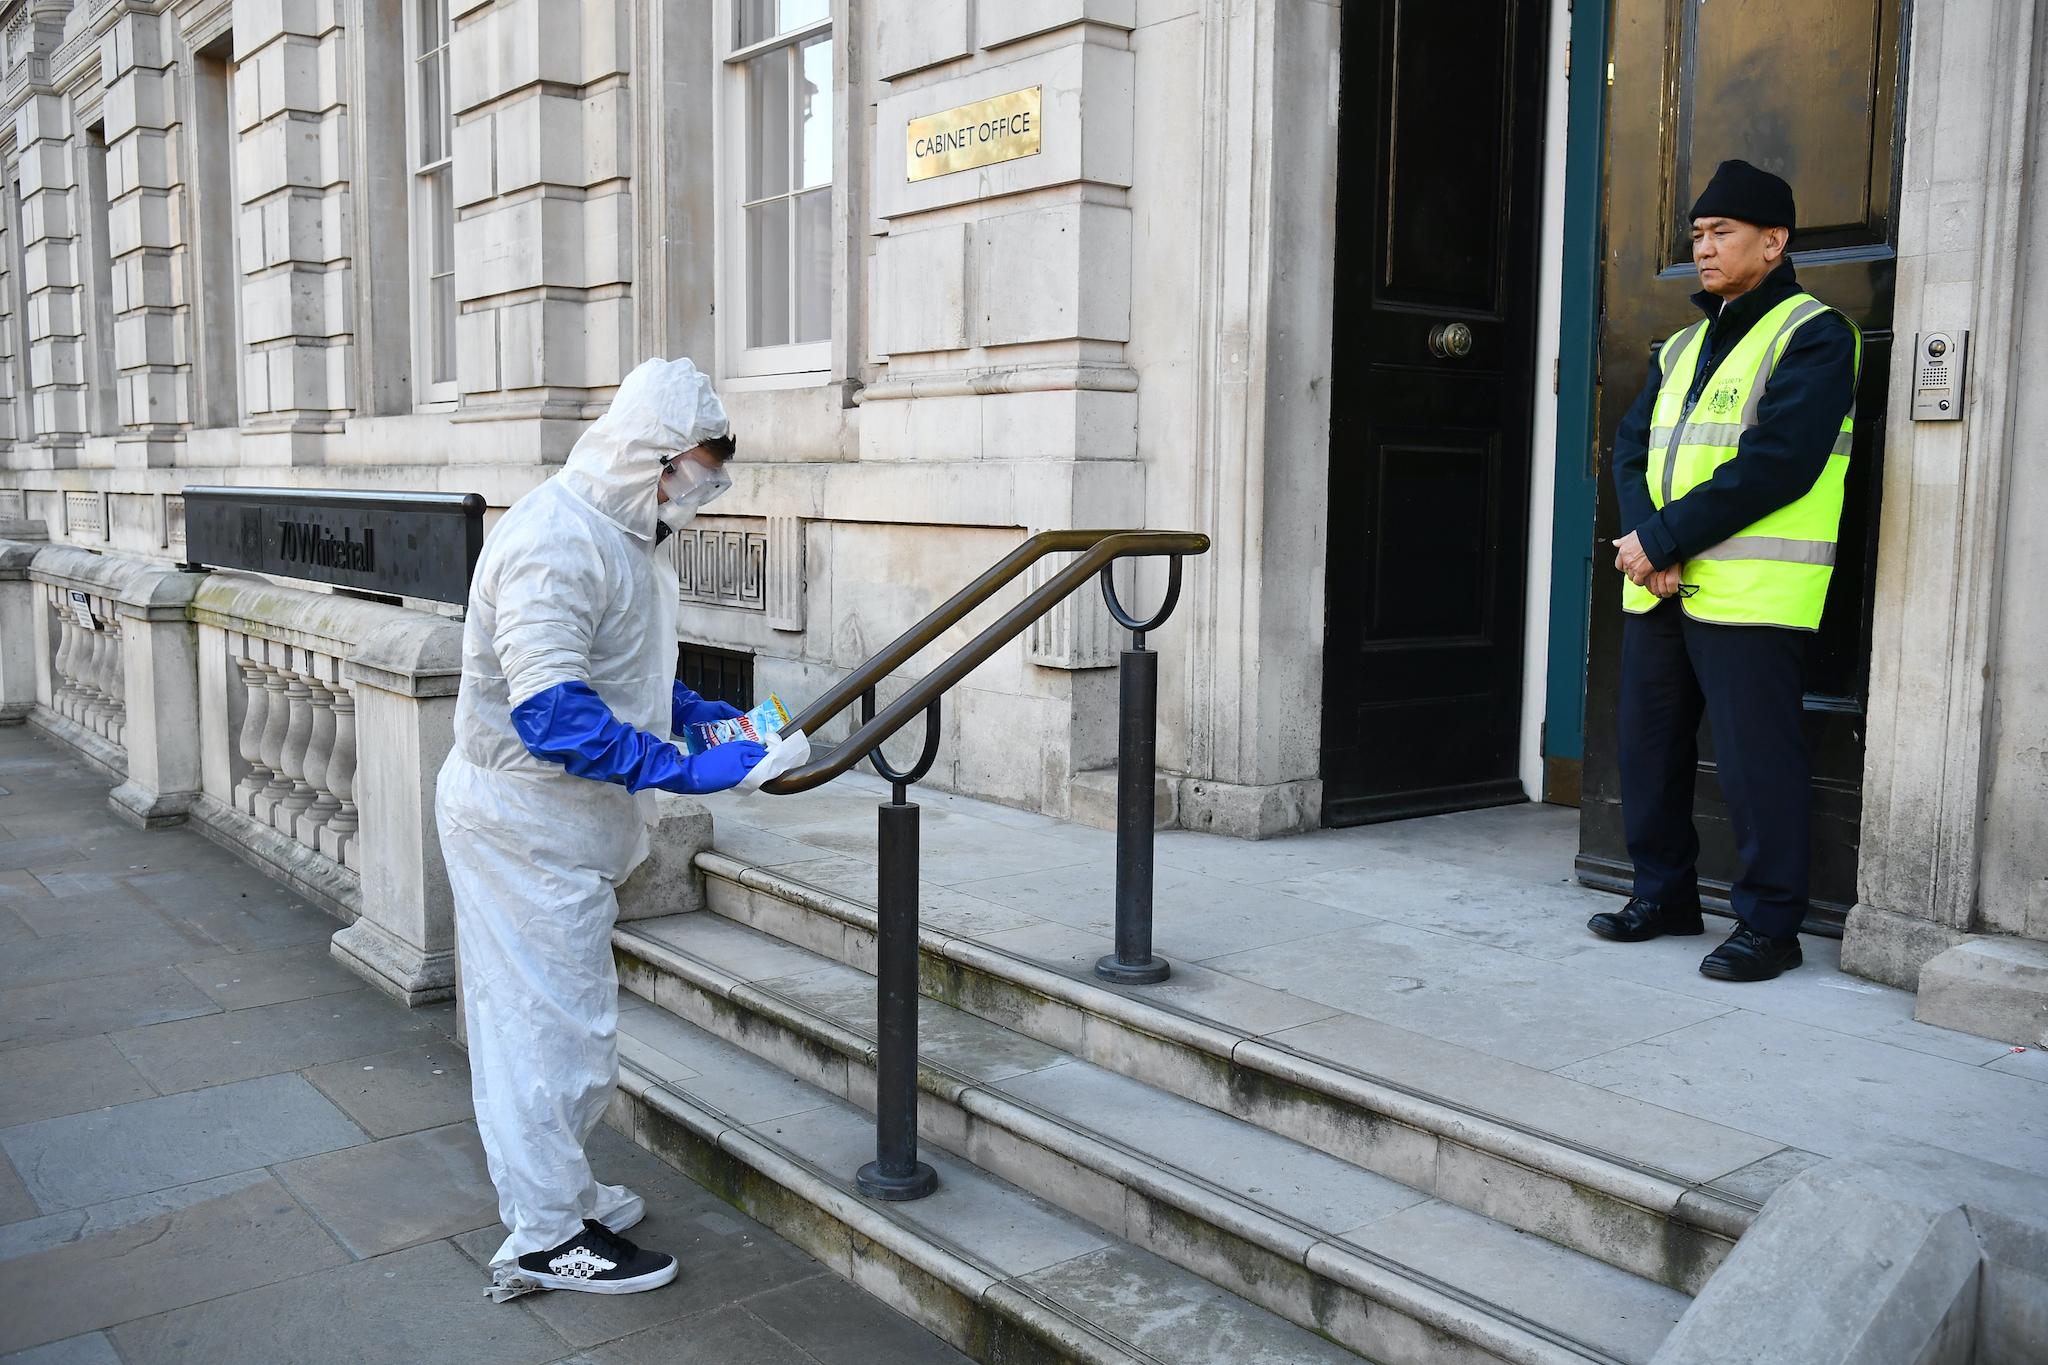 kids create a tiktok video in fake hazmat suits outside the Cabinet Office after a COBRA meeting